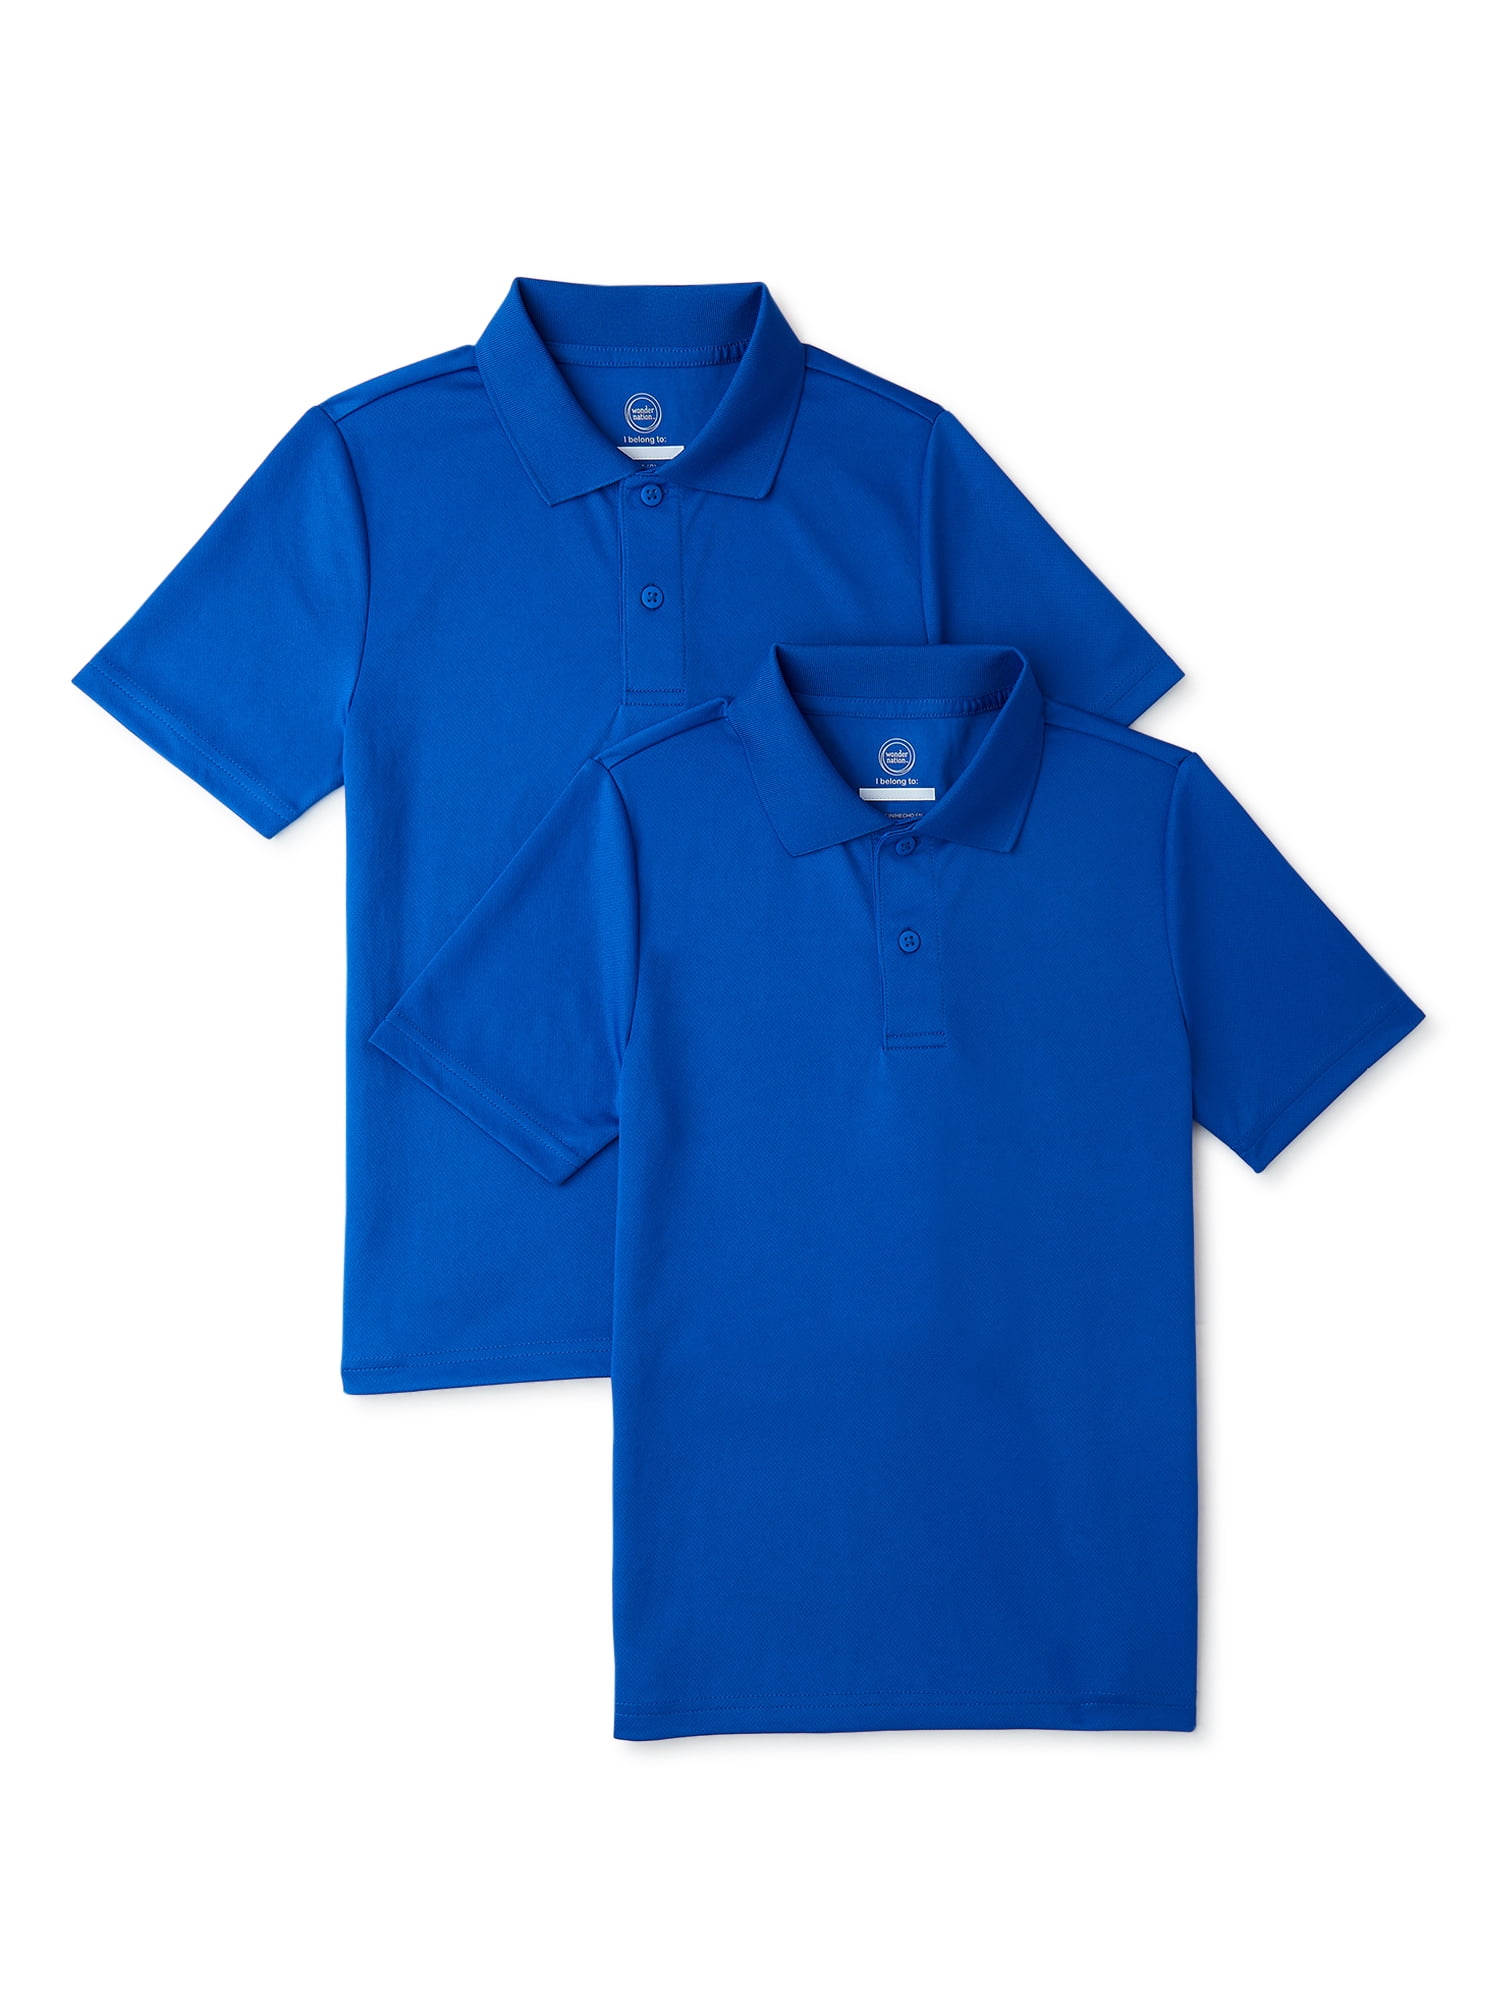 short sleeve navy blue polo shirt Boys Size 10-12 New with tags 